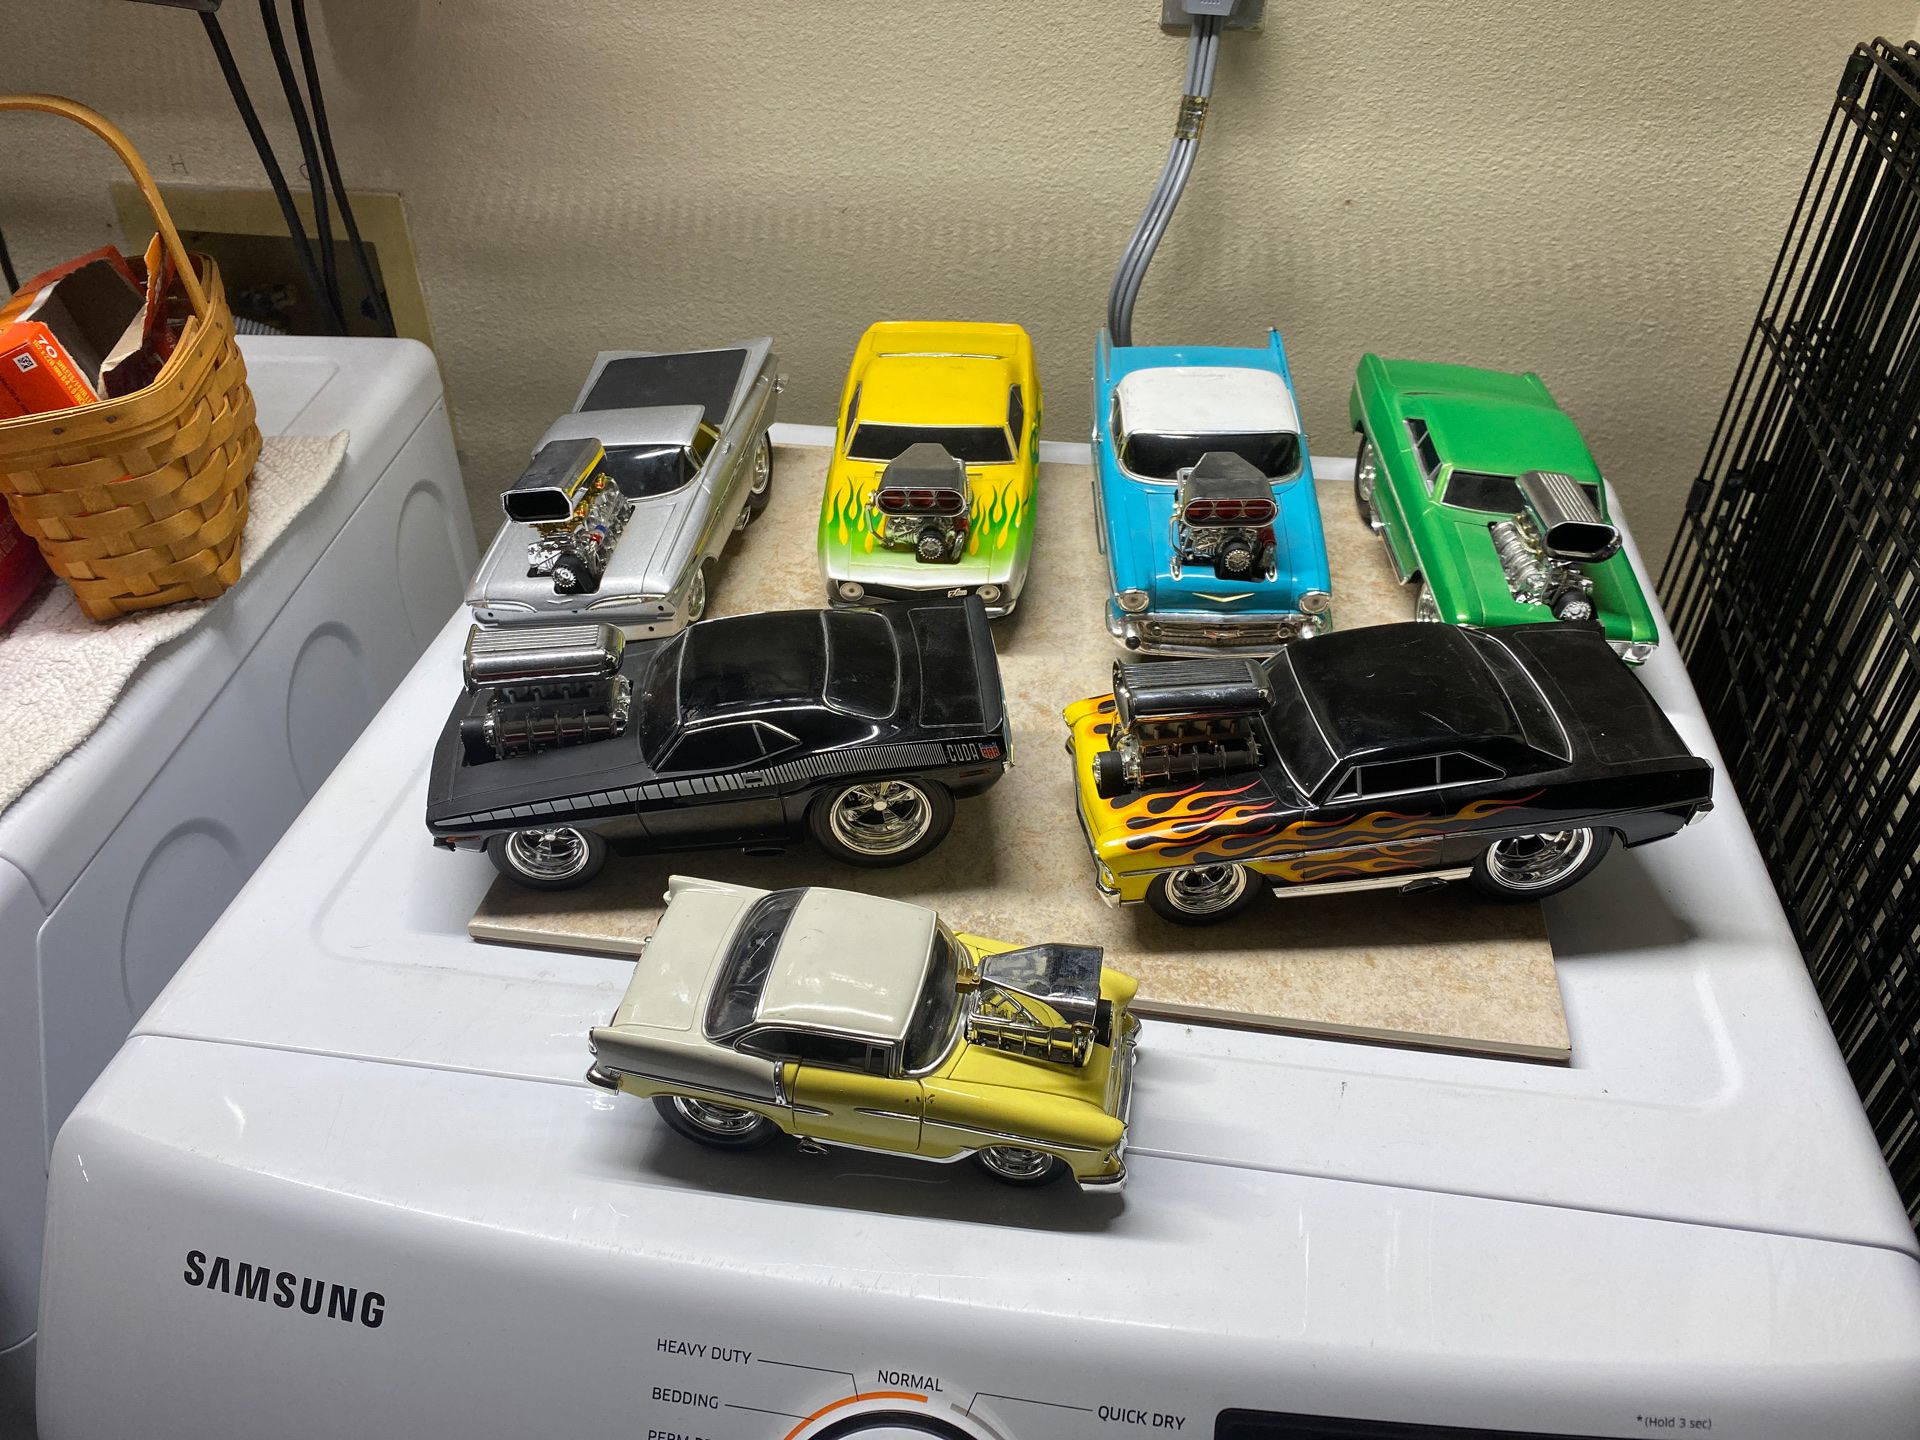 Toy cars had for 20 years